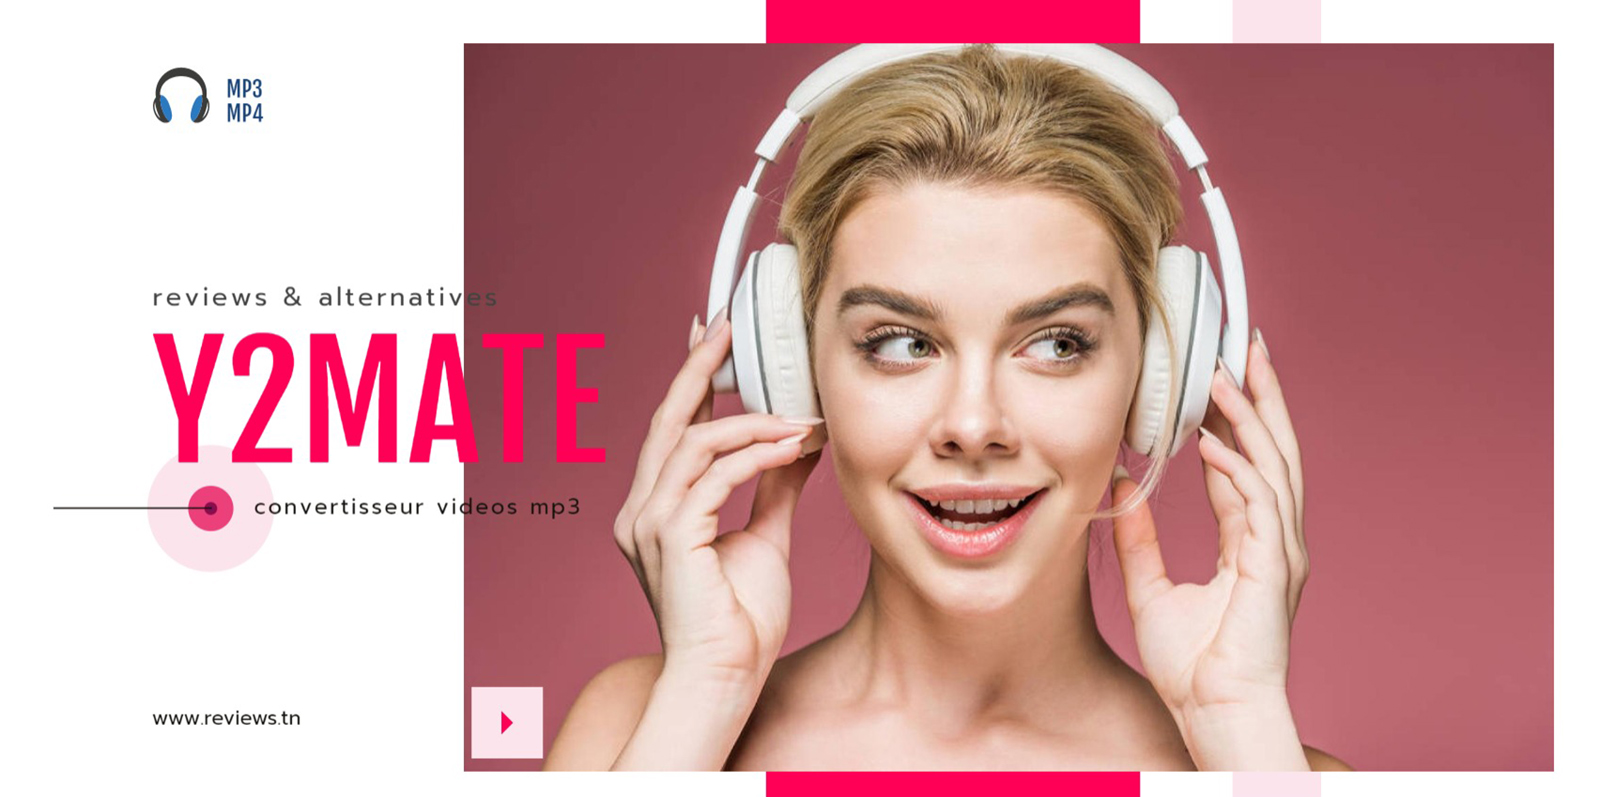 Y2mate: Top Site to Convert YouTube Video to MP3 and MP4 (2021 Edition)